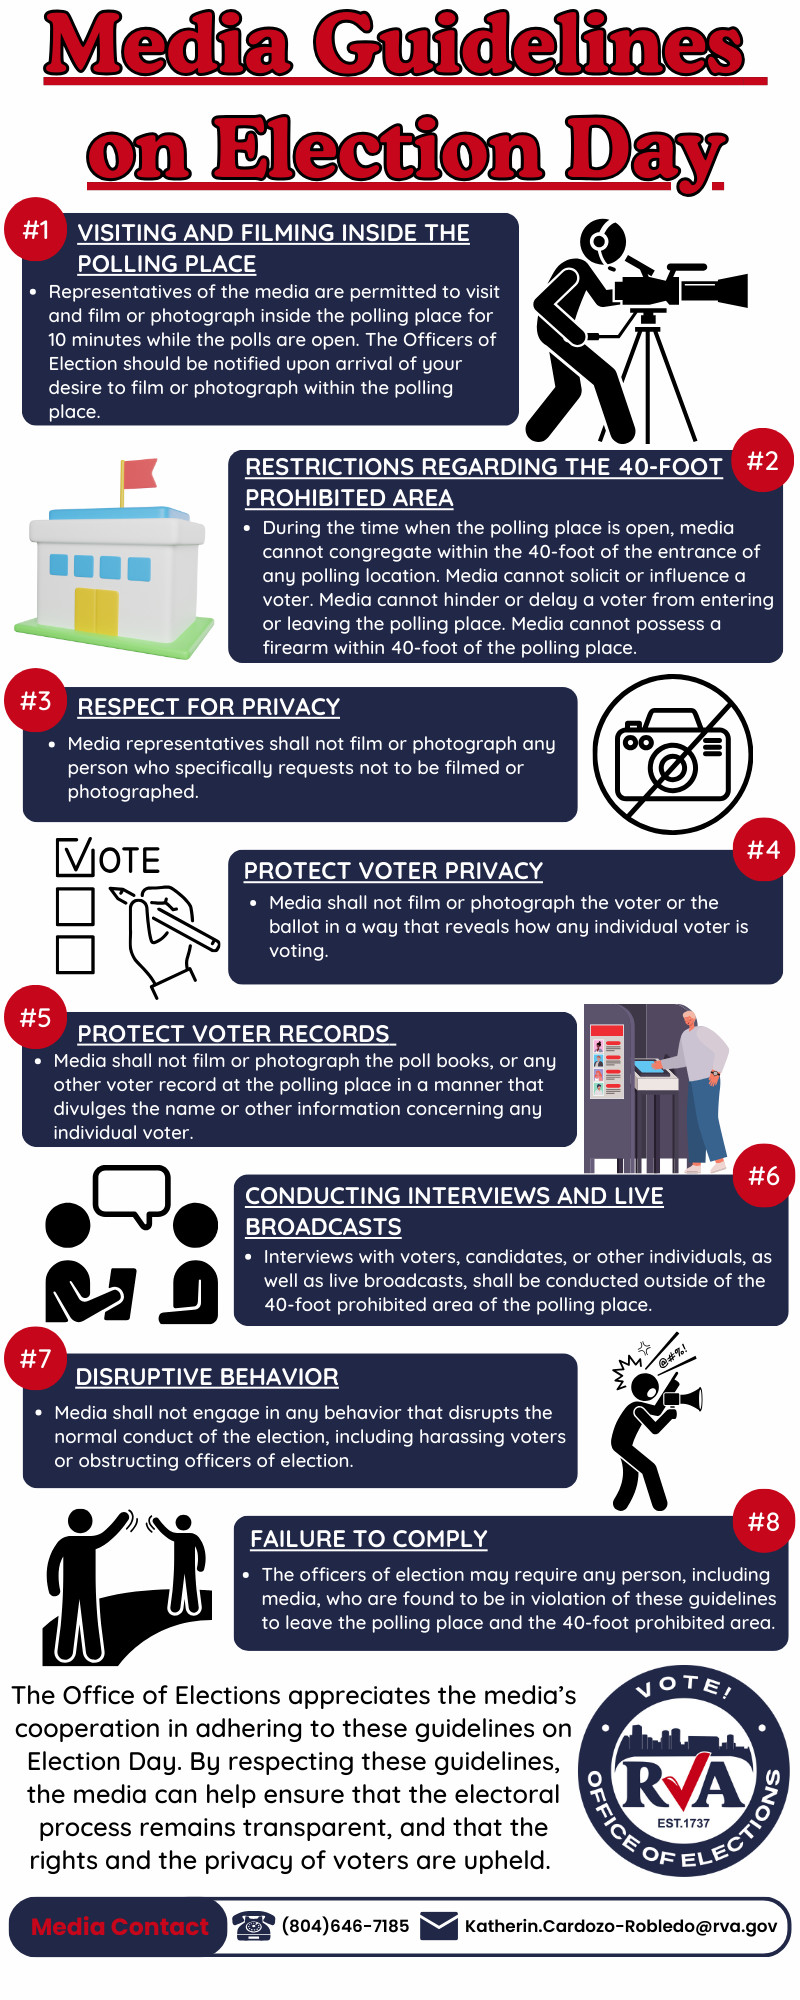 Media Guidelines on Election Day